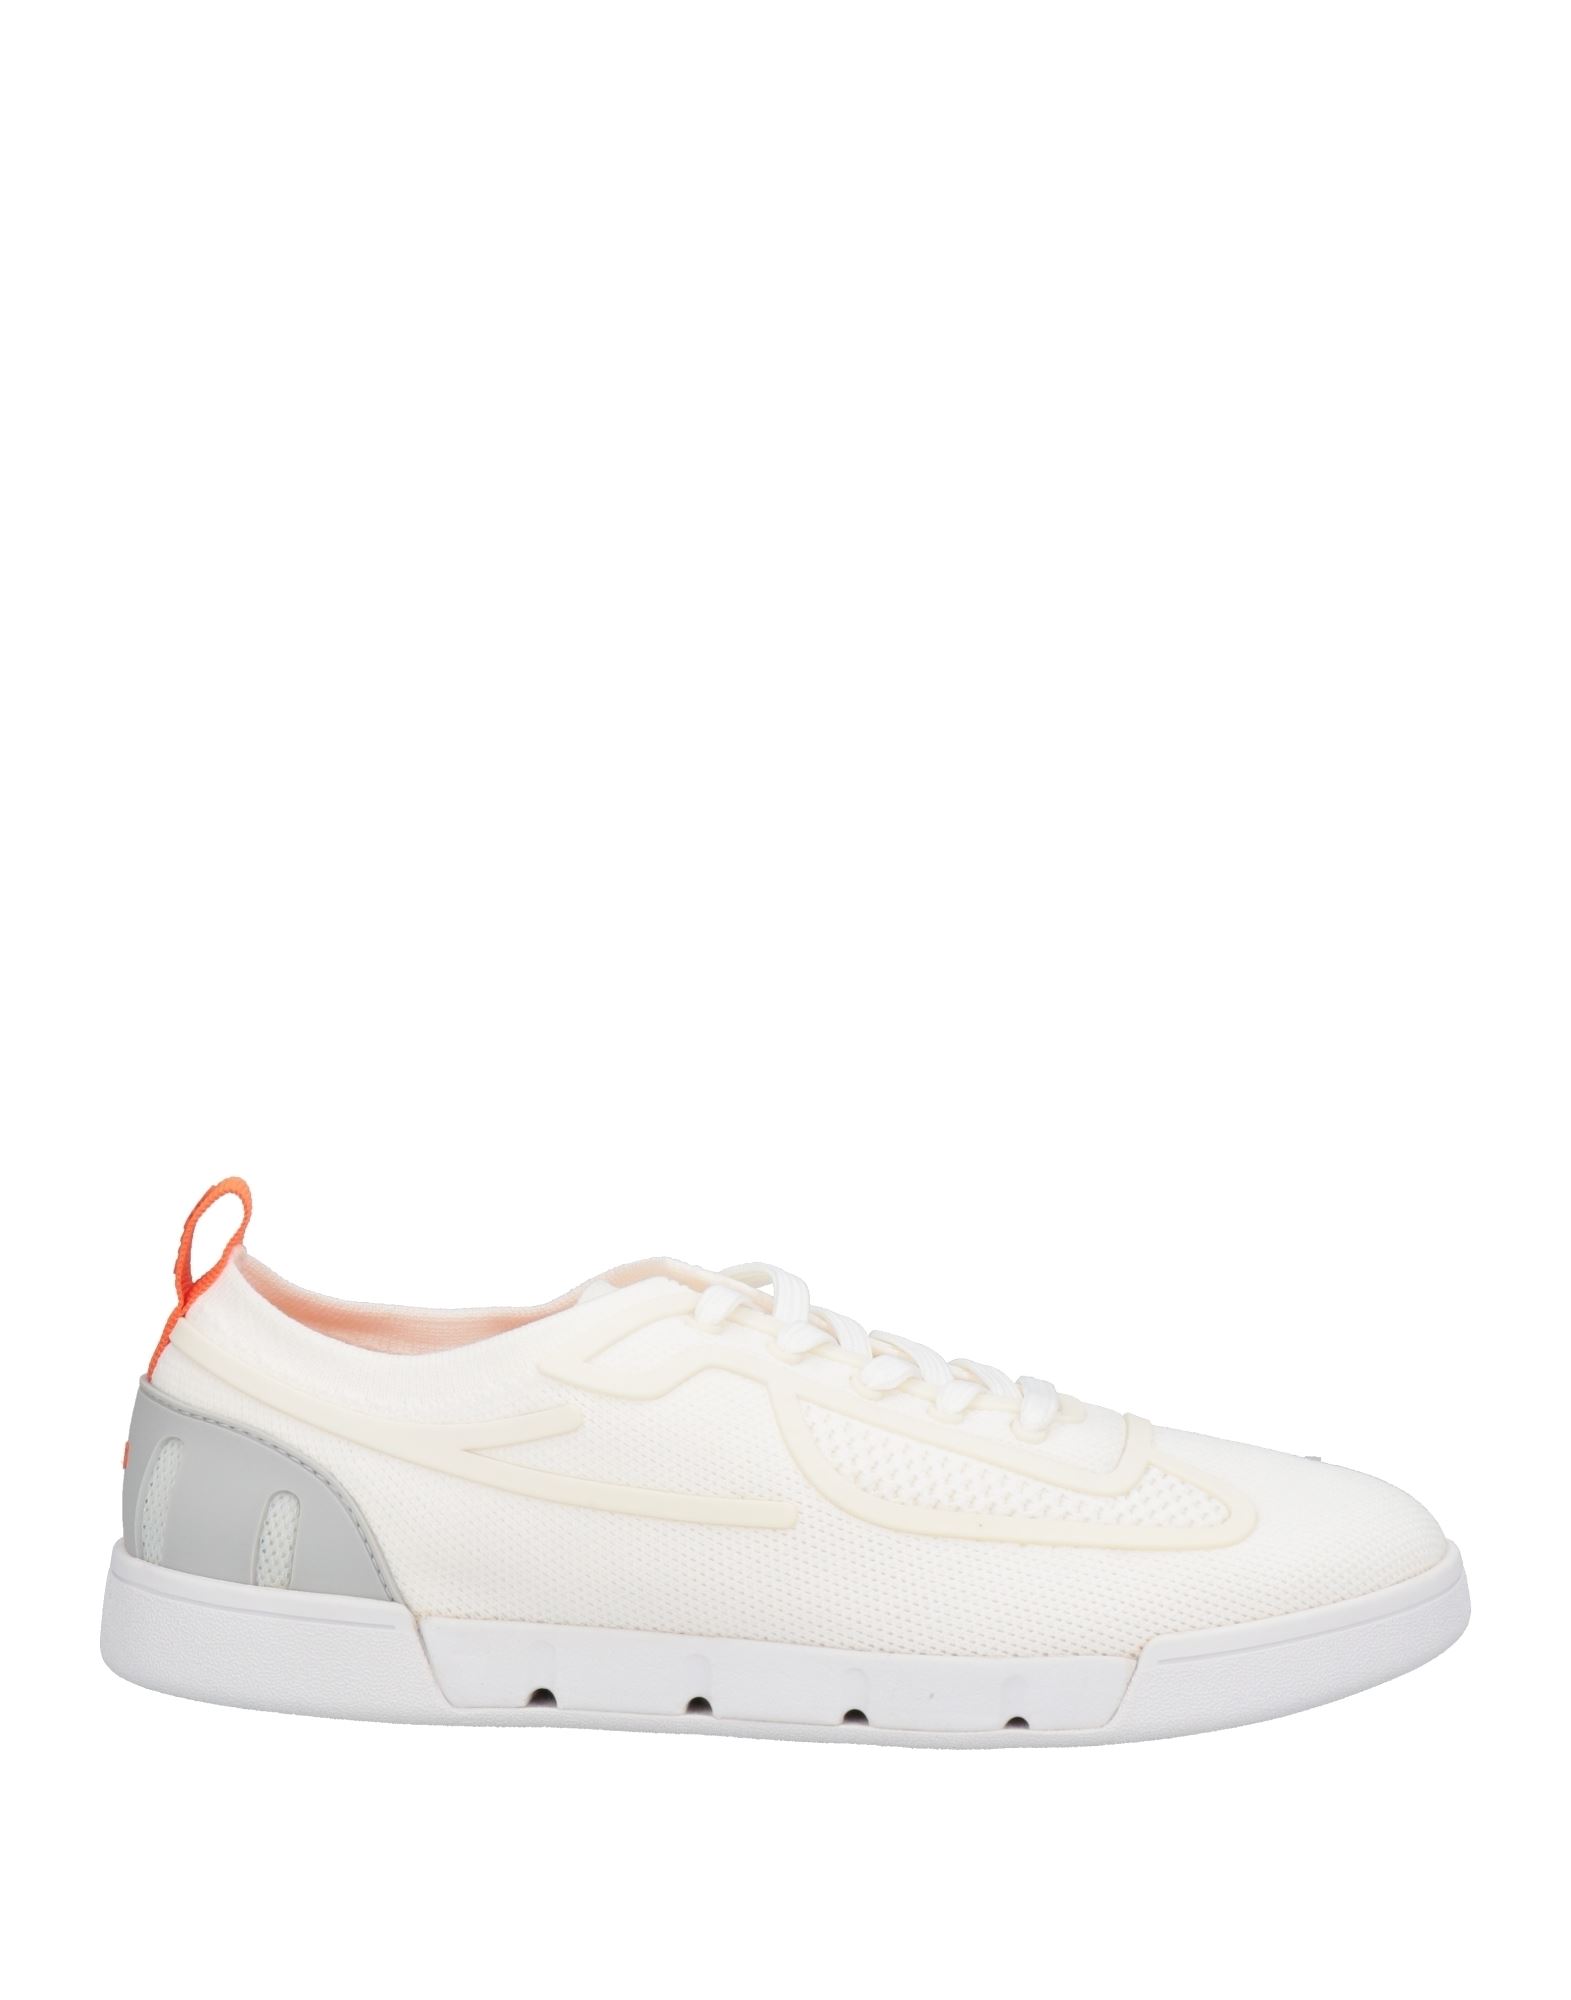 Swims Sneakers In White